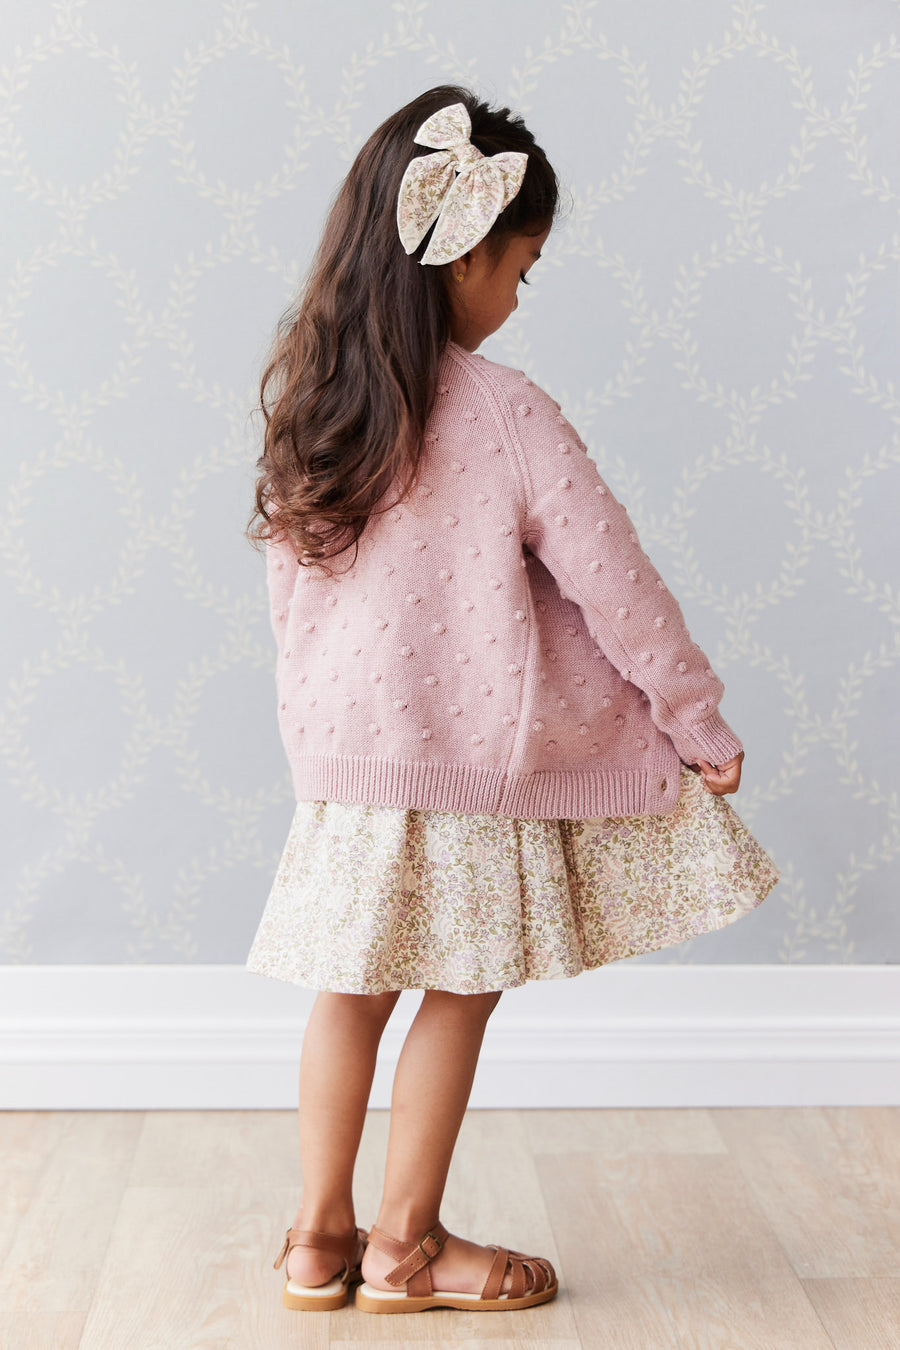 OG Dotty Knit Cardigan - Cameo Pink Marle Childrens Cardigan from Jamie Kay NZ